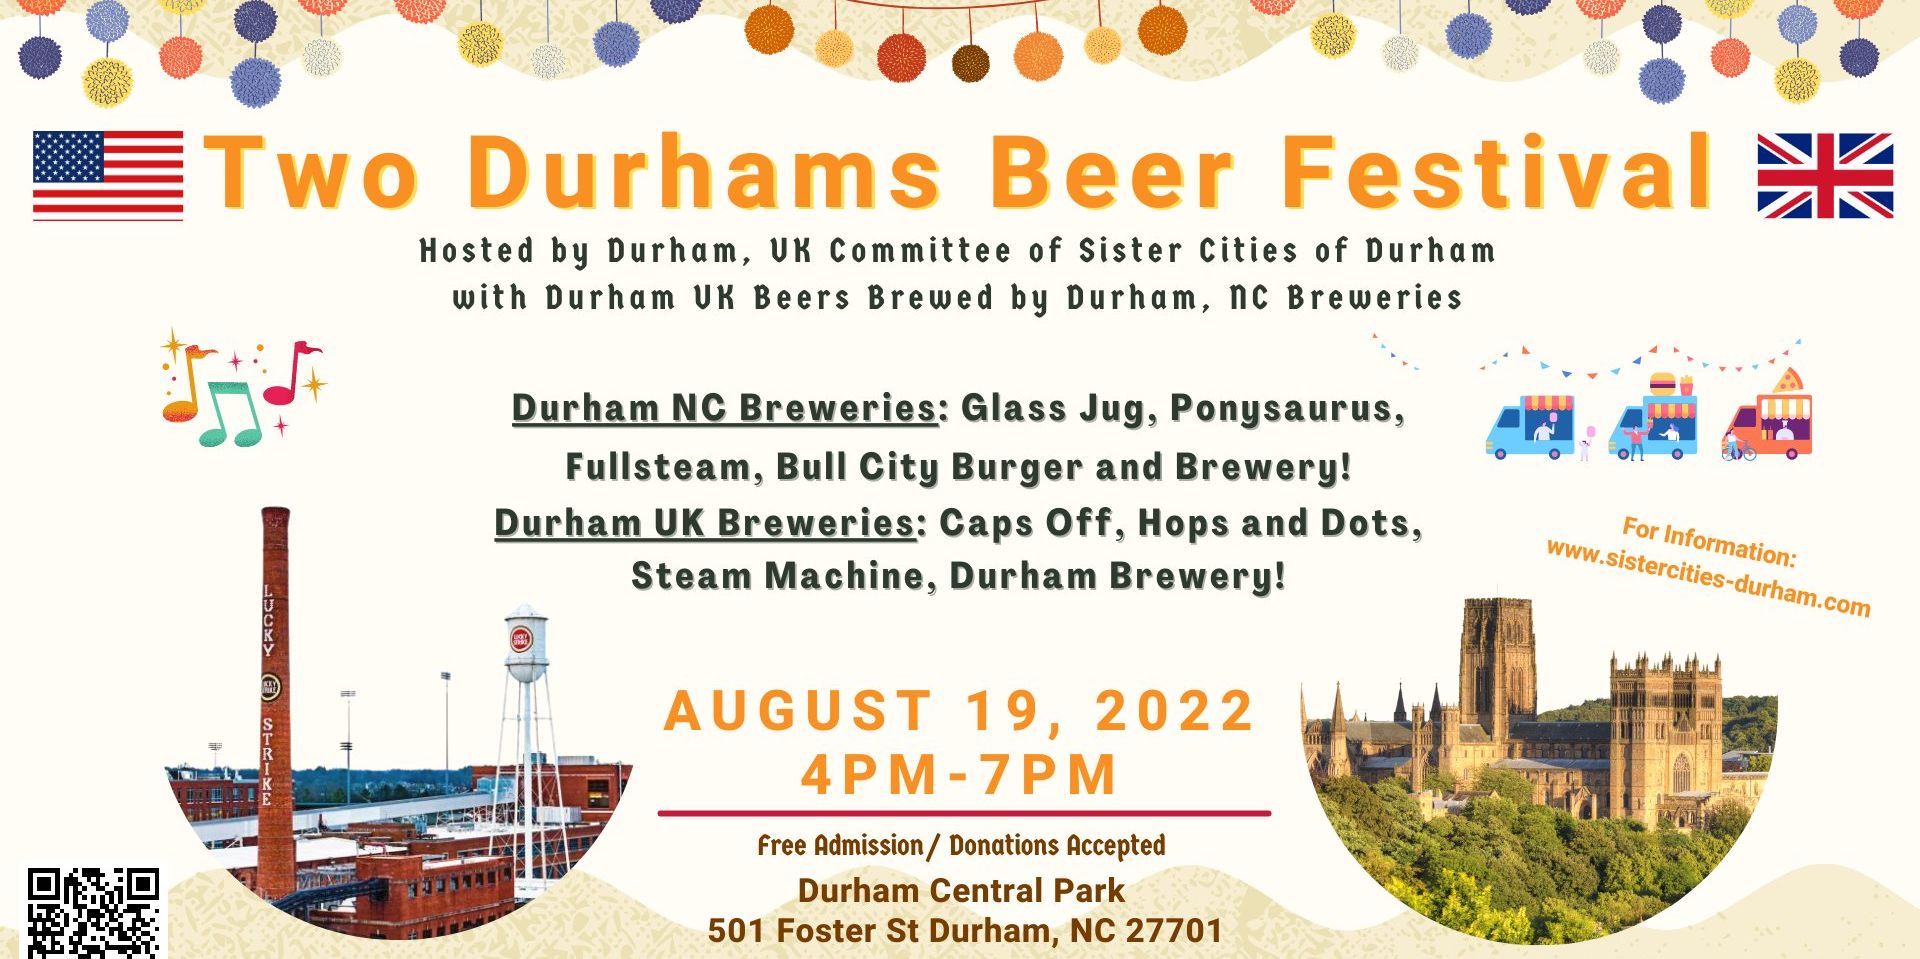 Two Durhams Beer Festival promotional image